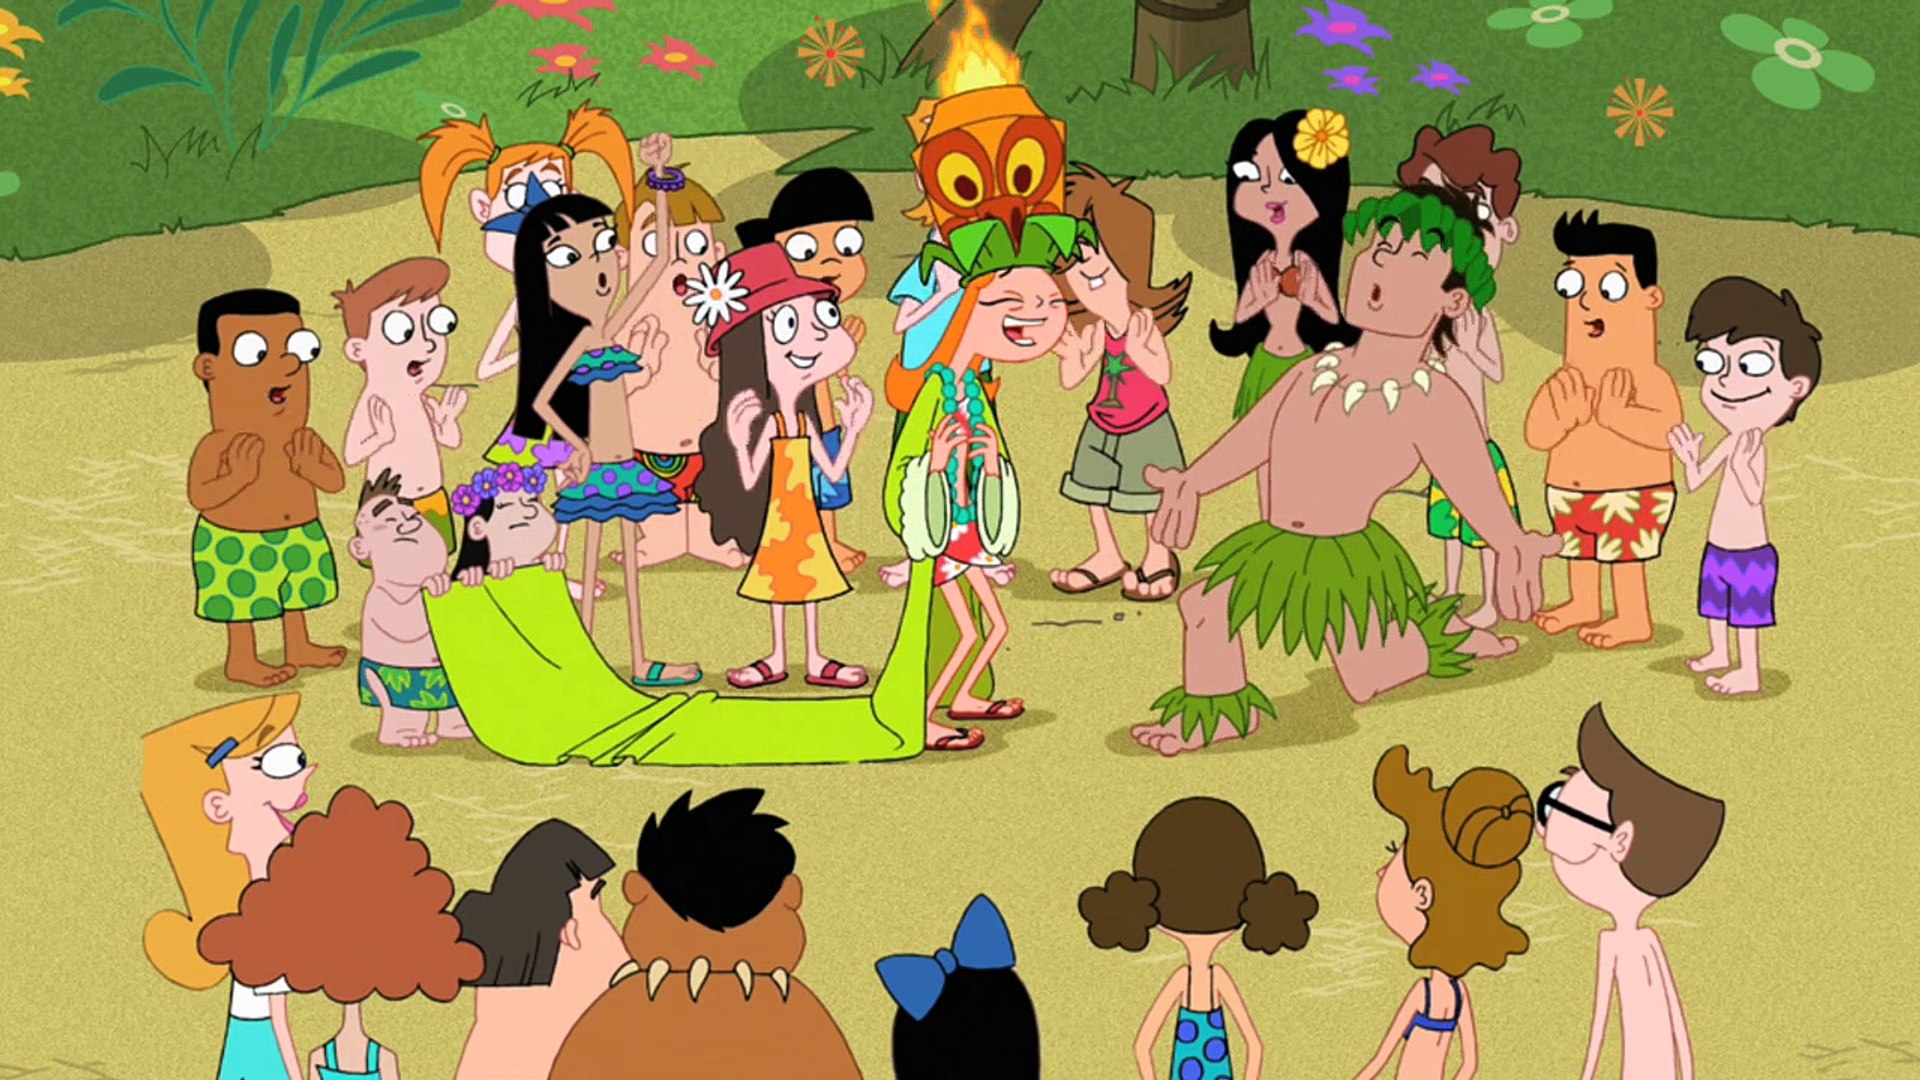 Phineas and Ferb 002 - Lawn Gnome Beach Party of Terror